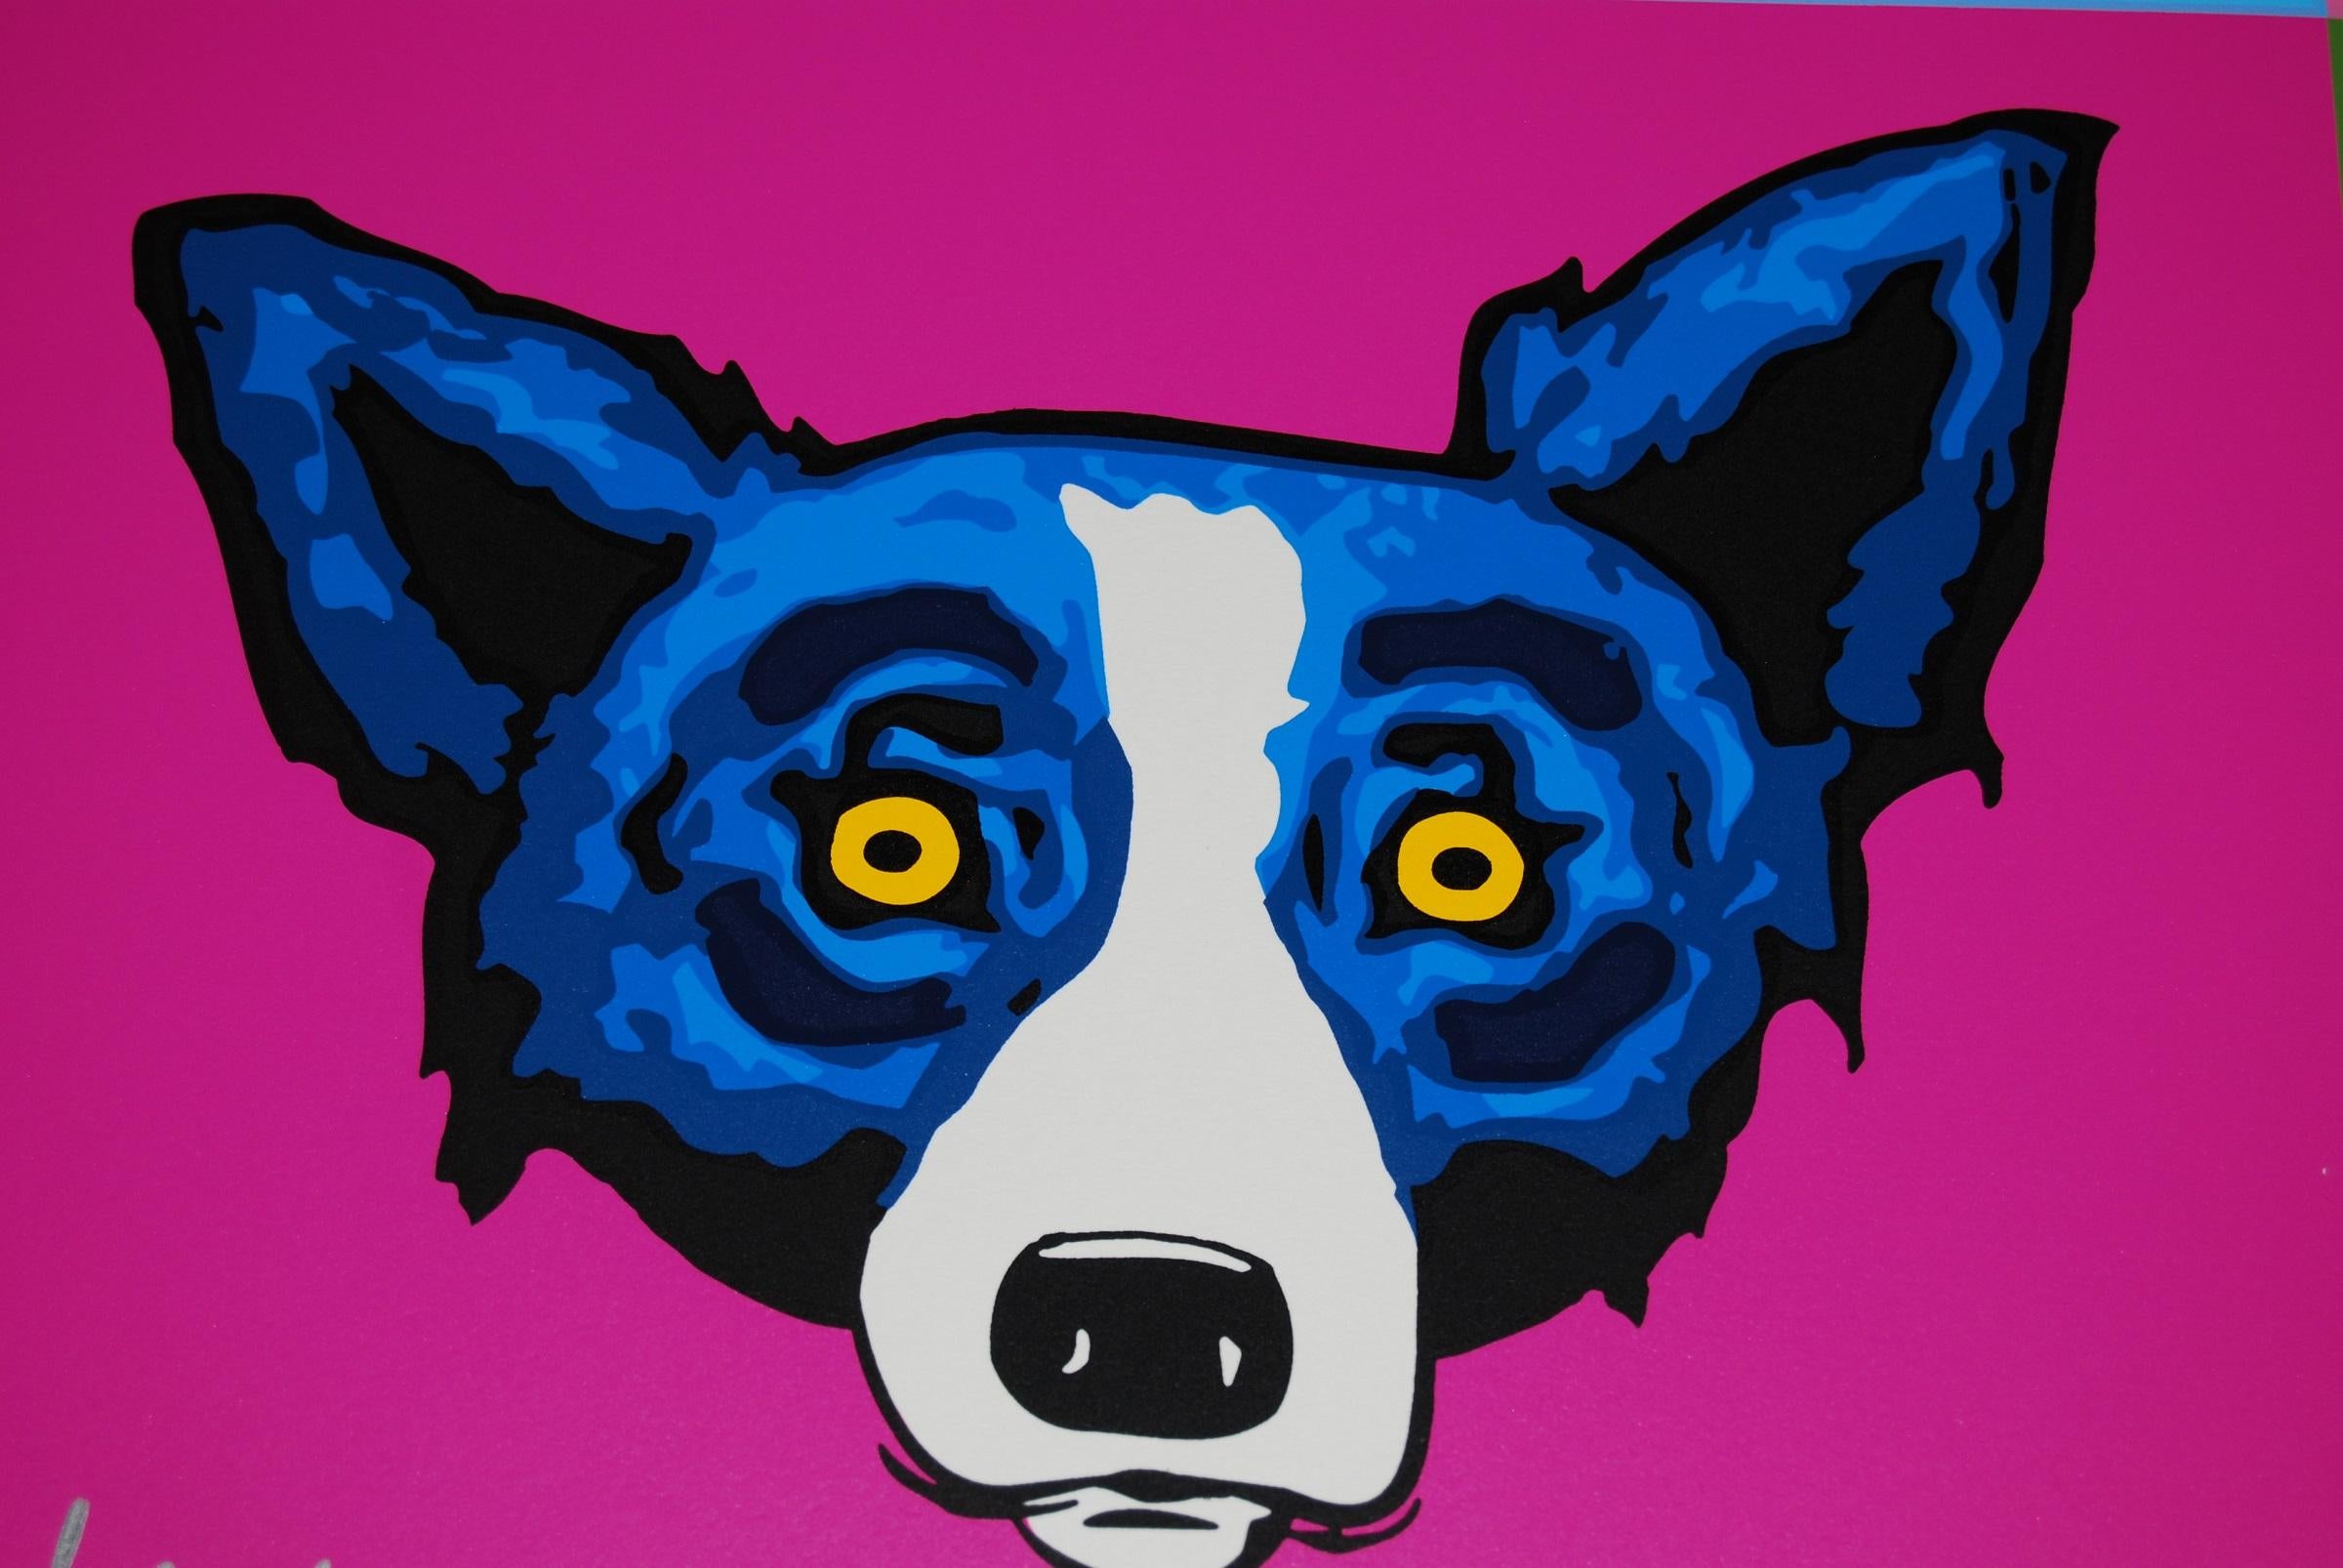 This Blue Dog work consists of 4 frames, 1 each blue, pink, fuchsia and green.  Each frame contains the head of a blue dog all with soulful yellow eyes.  This pop art animal original silkscreen print on paper is guaranteed authentic and is hand